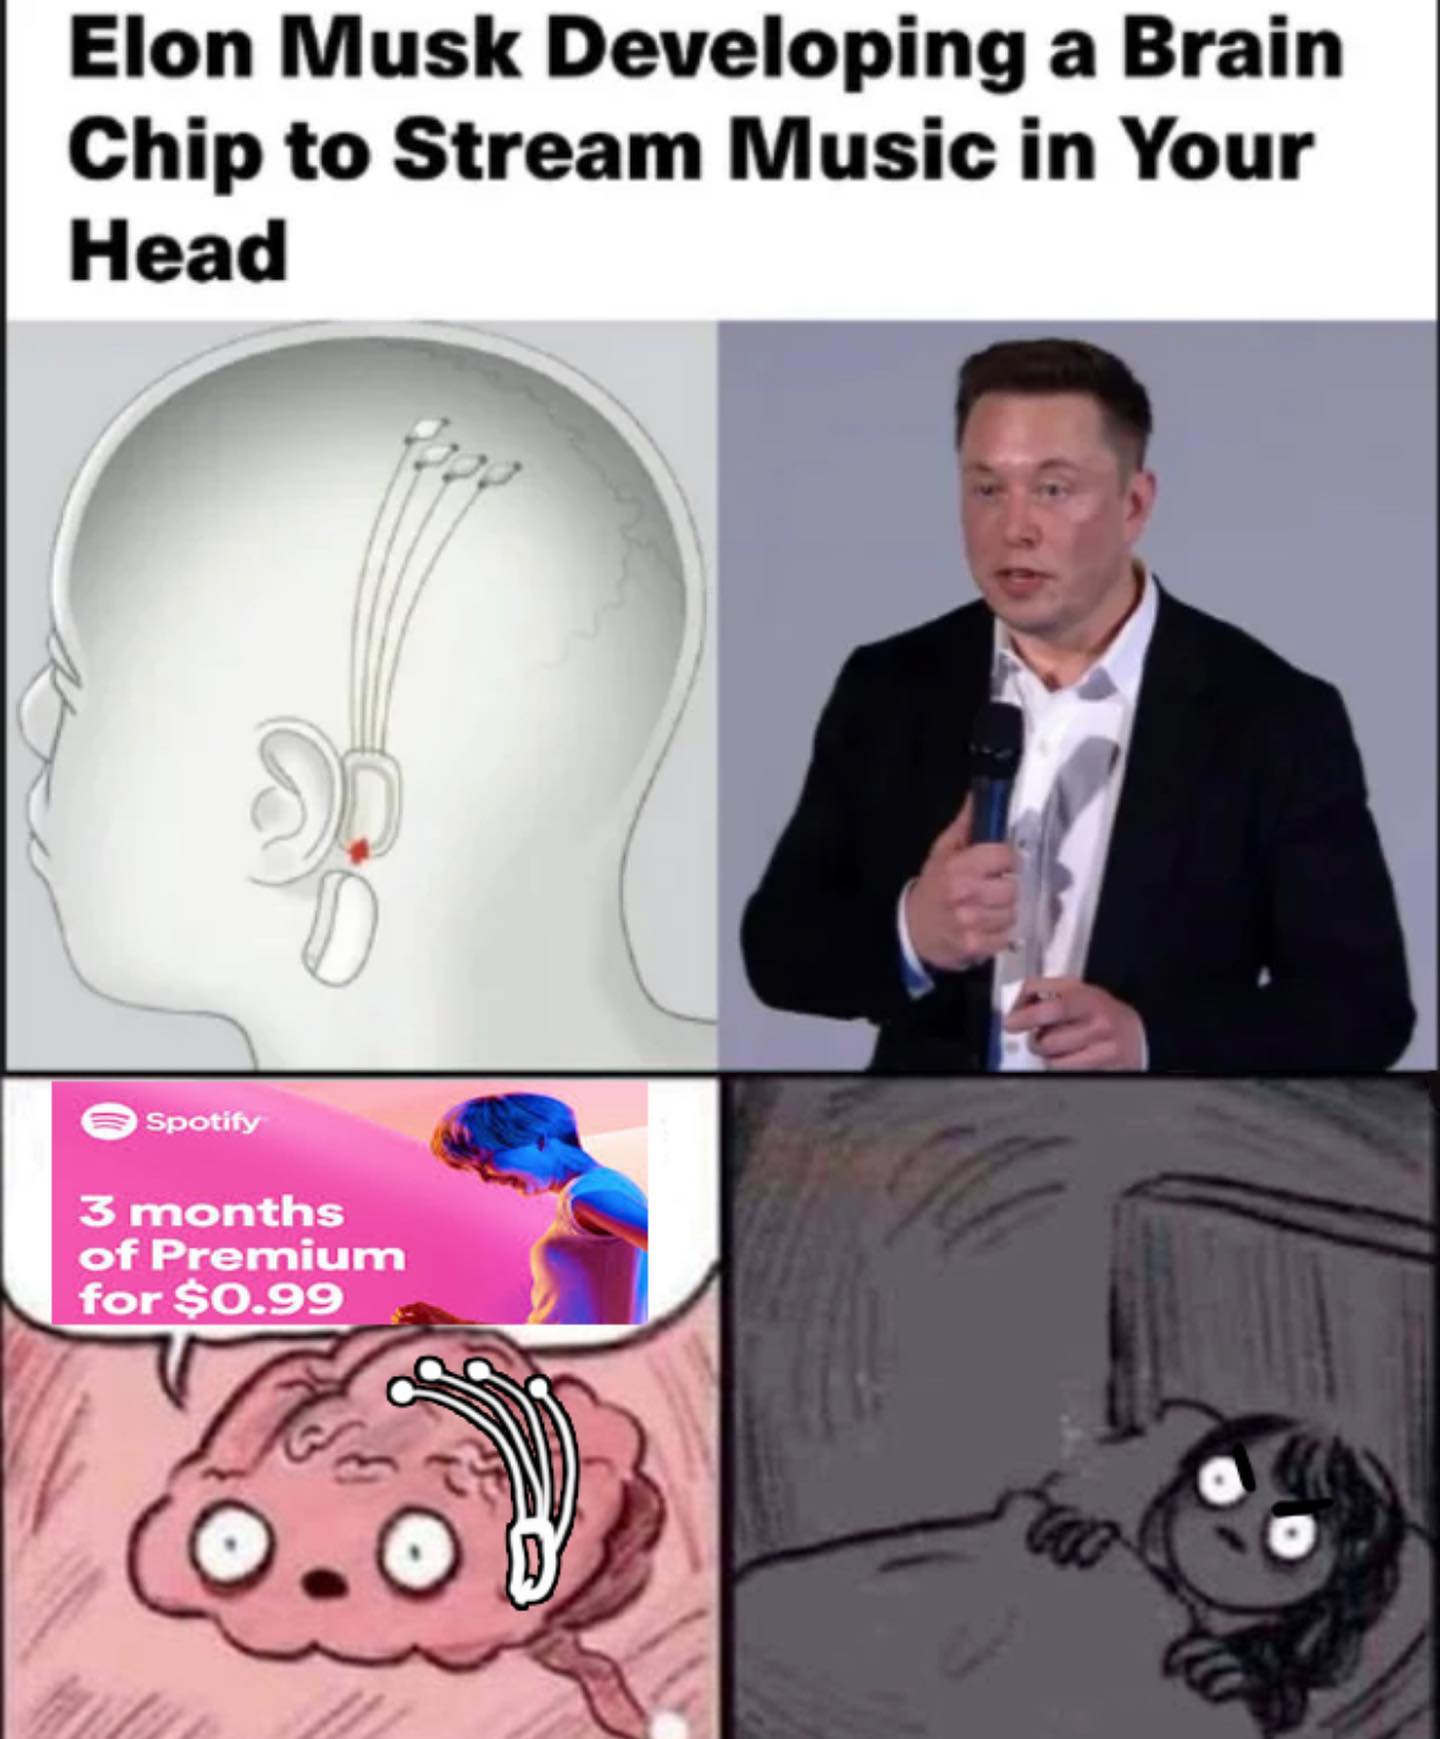 dank memes - cartoon - Elon Musk Developing a Brain Chip to Stream Music in Your Head so Spotify 3 months of Premium for $0.99 too